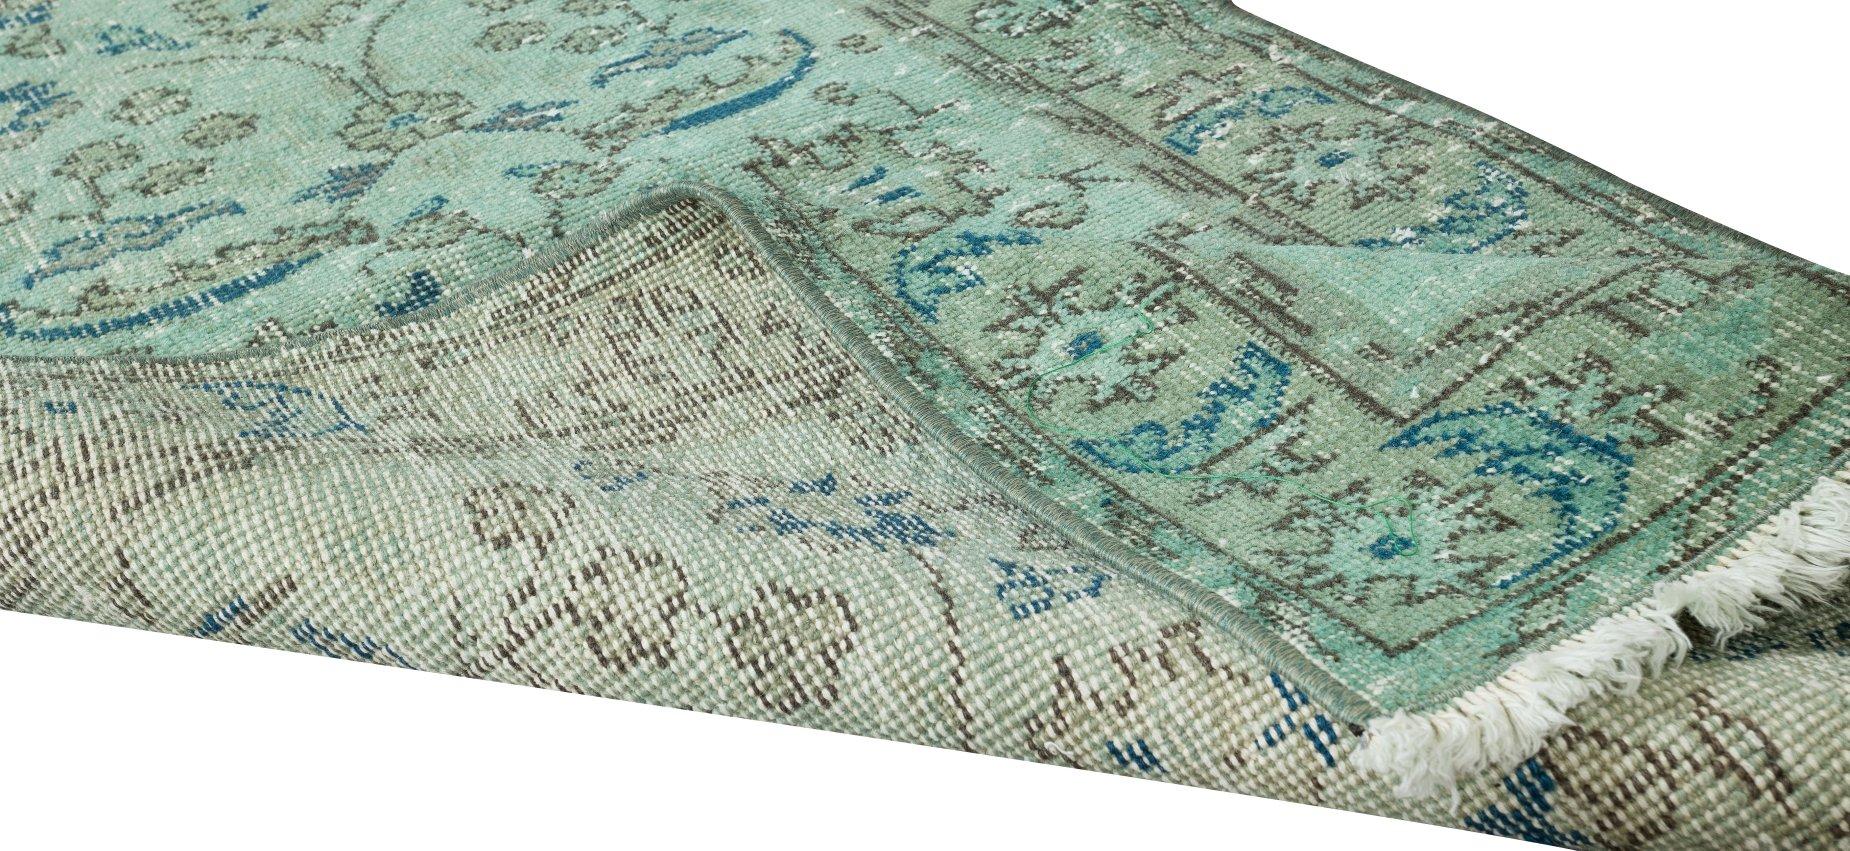 Hand-Woven 2.4x5 Ft Handmade Vintage Turkish Accent Rug Re-Dyed in Green 4 Modern Interiors